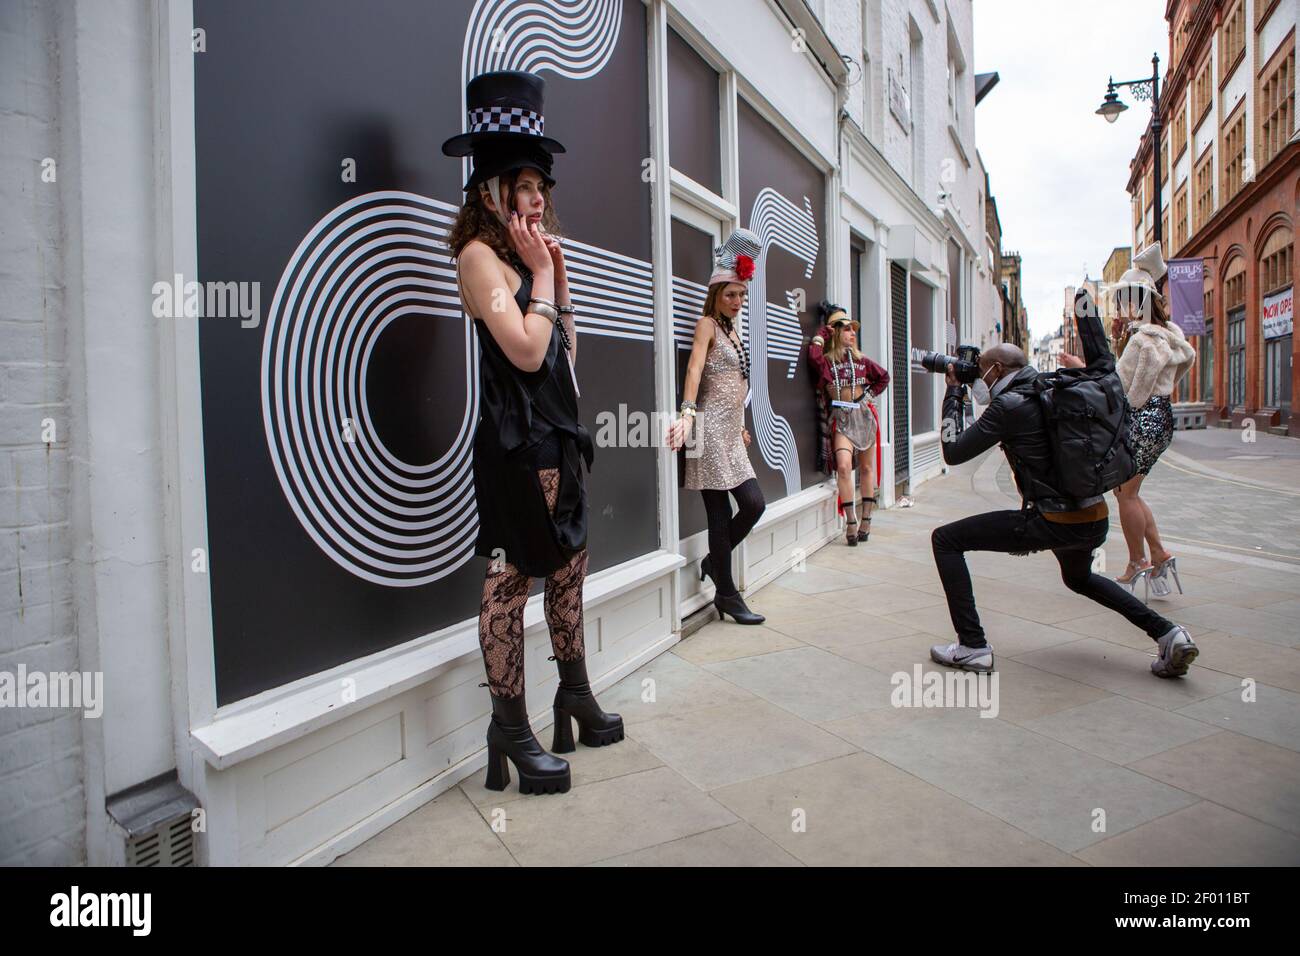 Models showcase Pierre Garroudi's latest colorful collection at one of the designer's specialty flash mob fashion shows in Bond Street,  London. Stock Photo